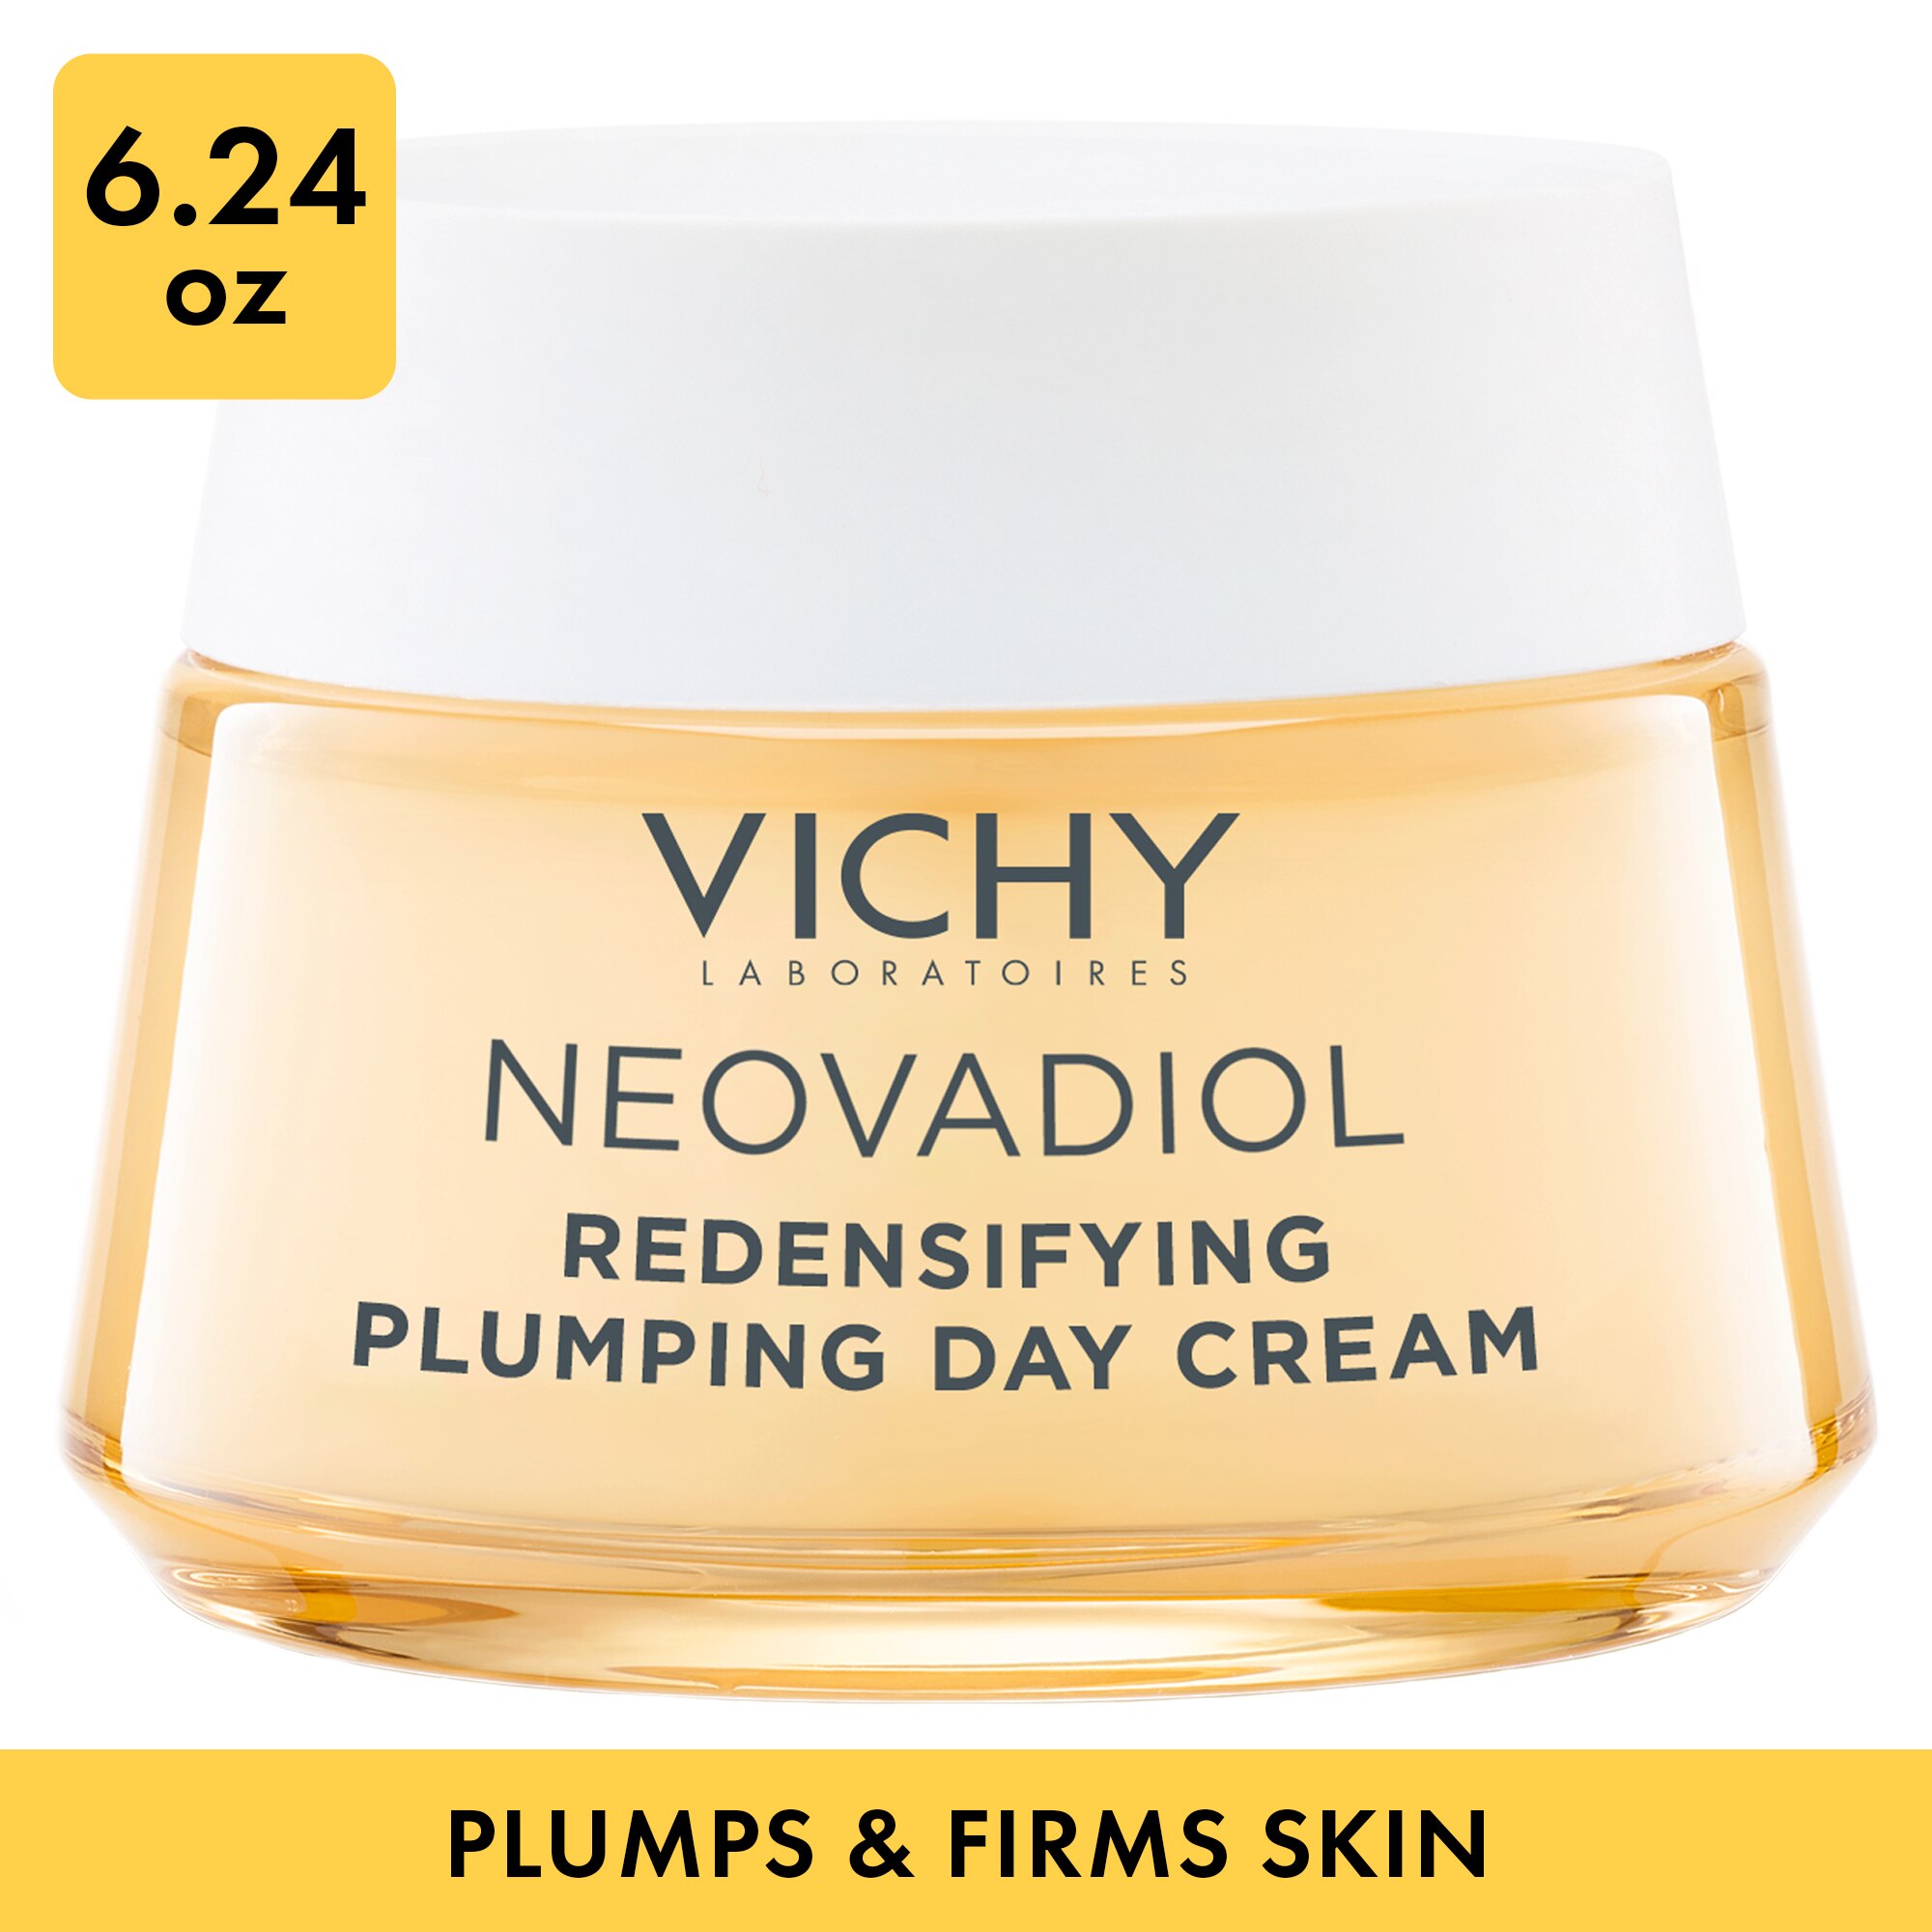 Vichy Laboratories Neovadiol Peri-Menopause Plumping Day Cream With Hyaluronic Acid, 1.6 Oz , CVS